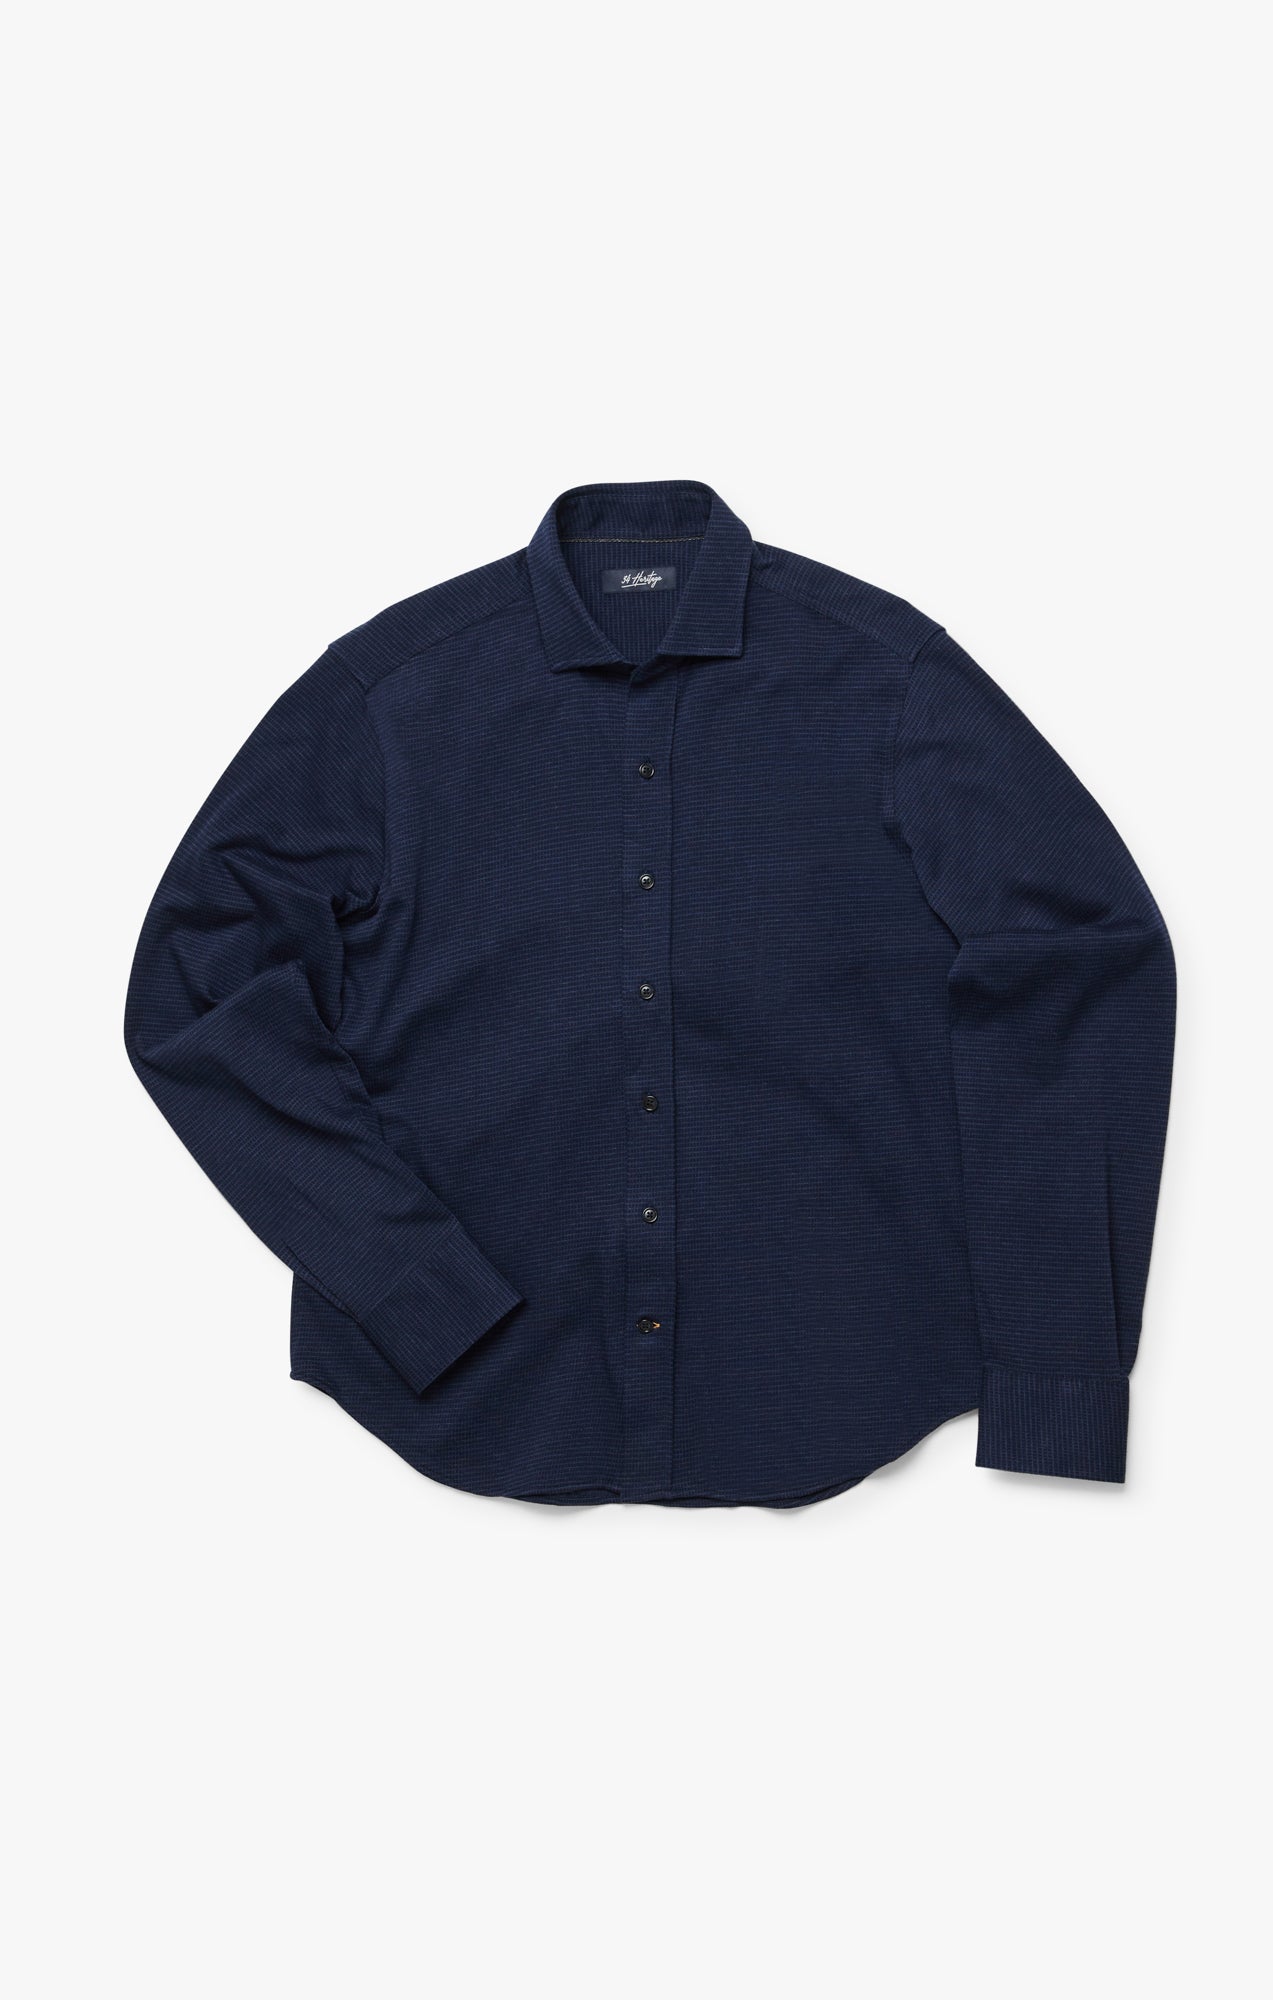 Structured Shirt In Navy Blue Image 9